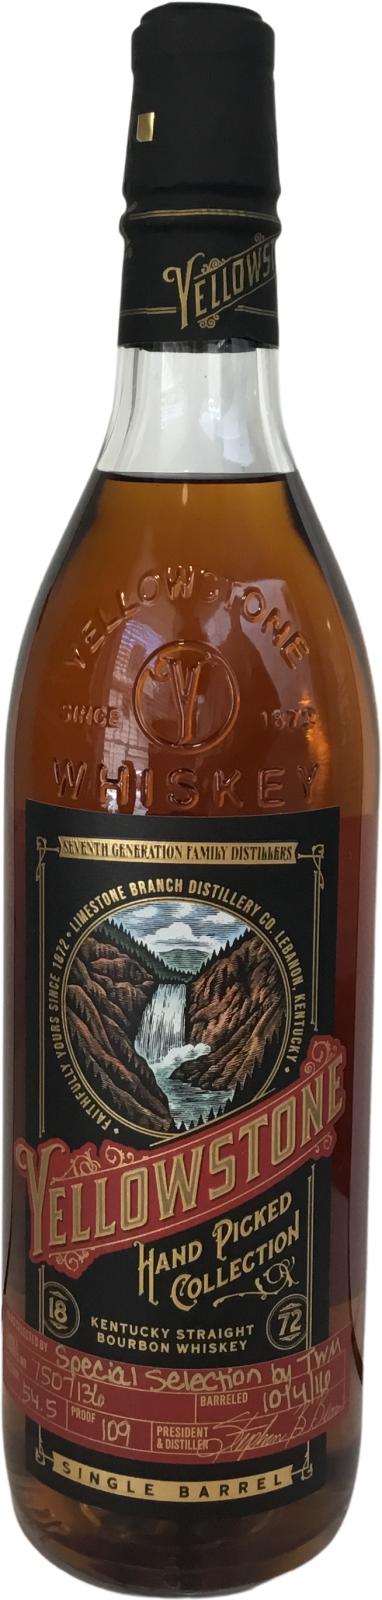 Yellowstone Hand Picked Collection #7507136 54.5% 750ml